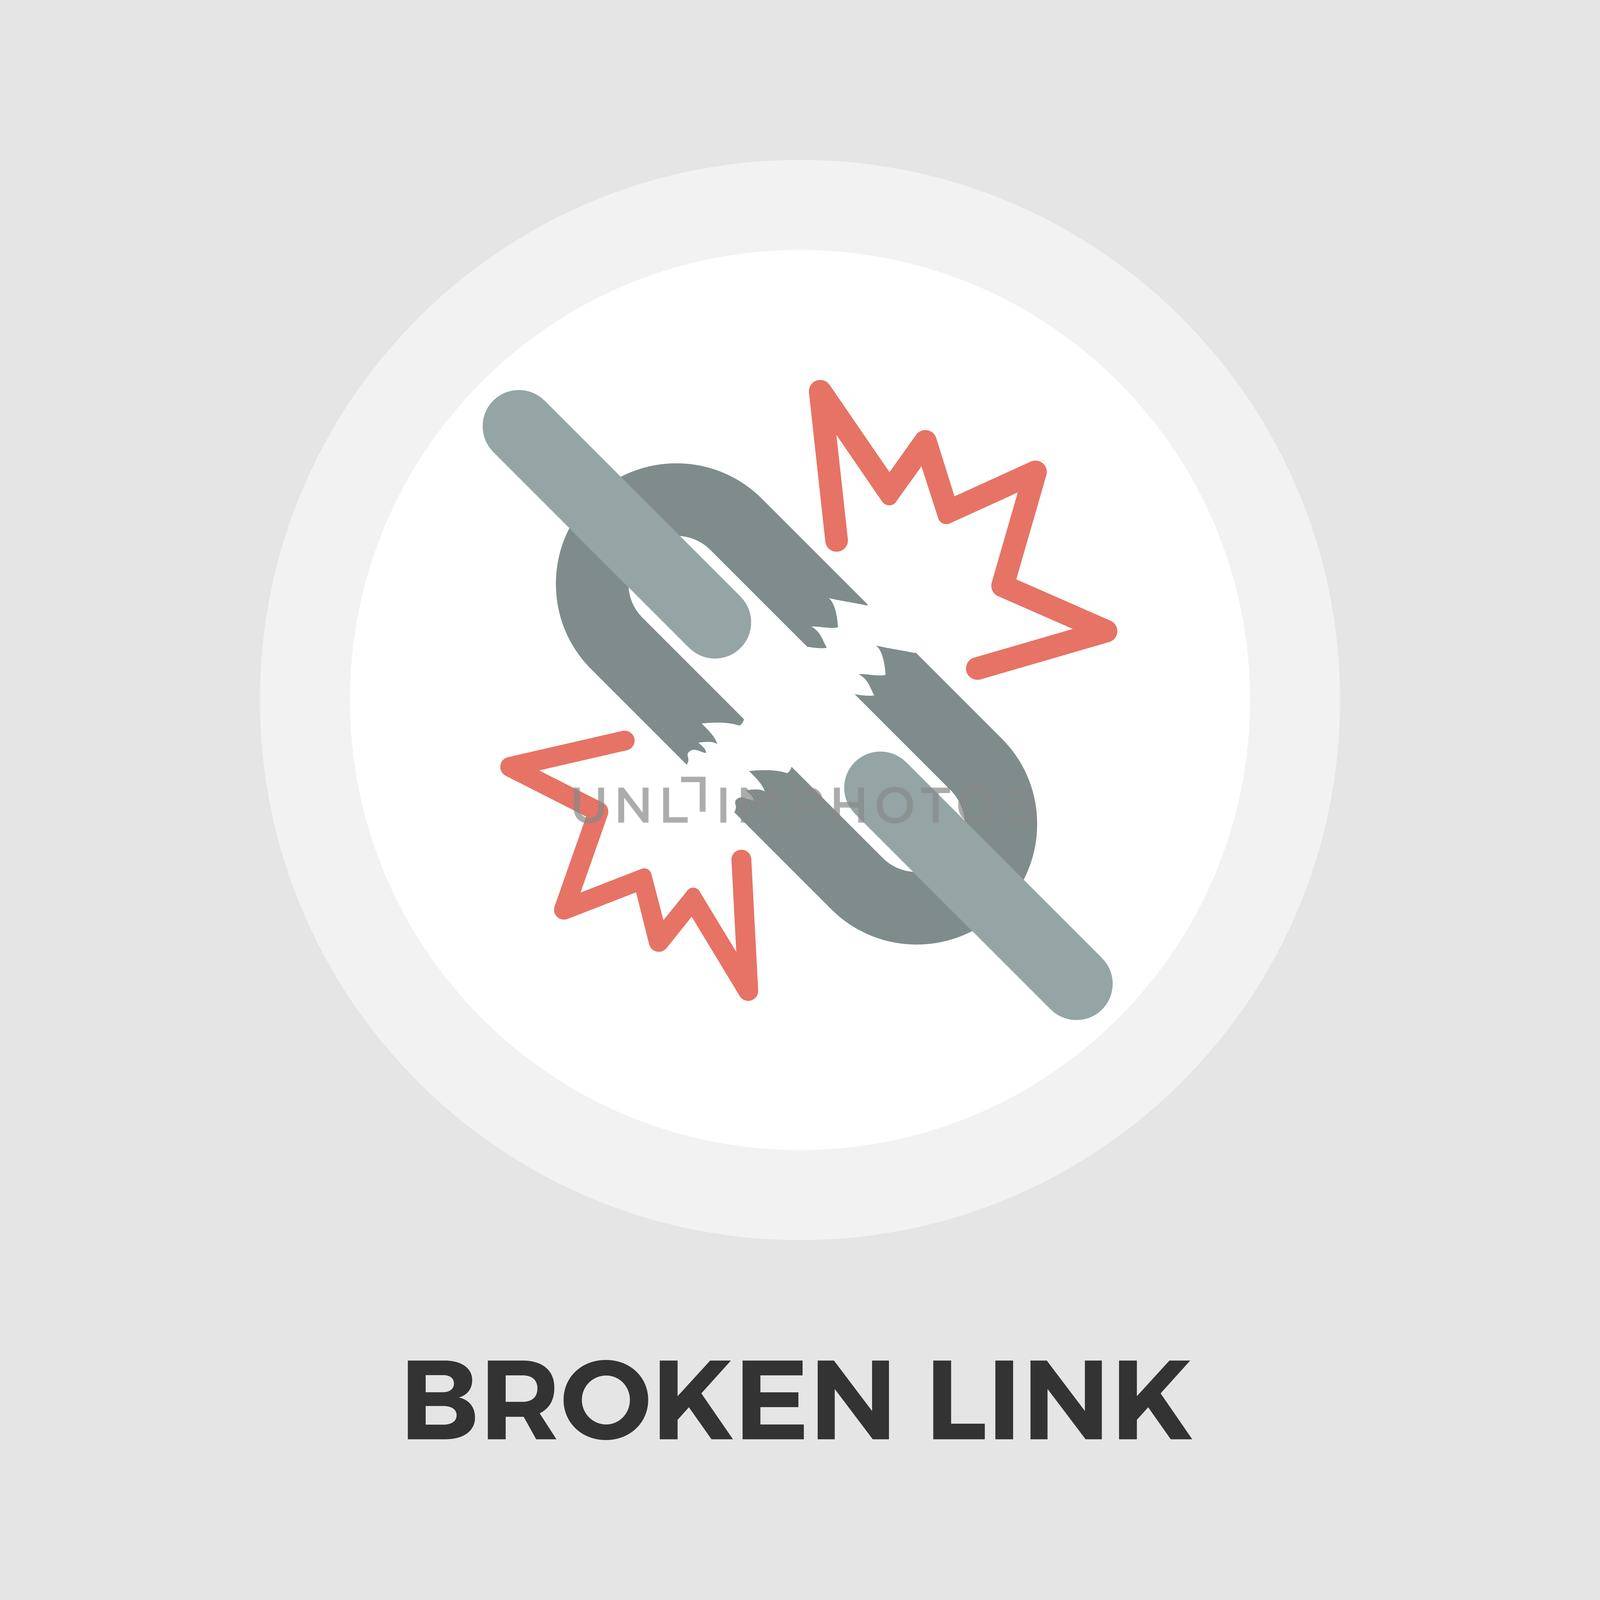 Broken connection icon . Flat icon isolated on the white background. Editablefile. illustration.